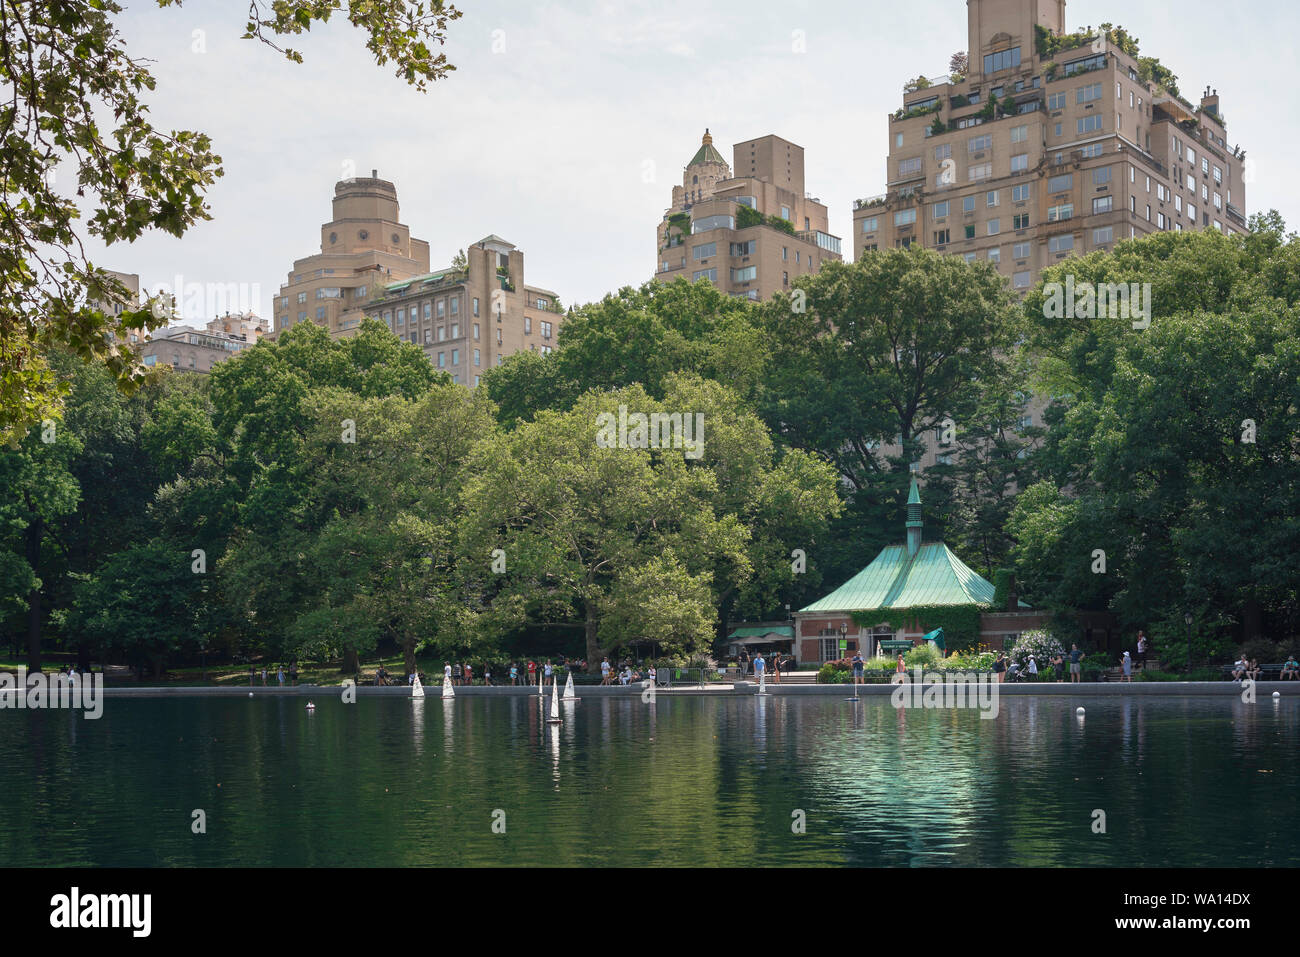 View in summer of the Conservatory Water model boat lake in East Central Park and Upper East Side buildings in Manhattan, New York City, USA Stock Photo